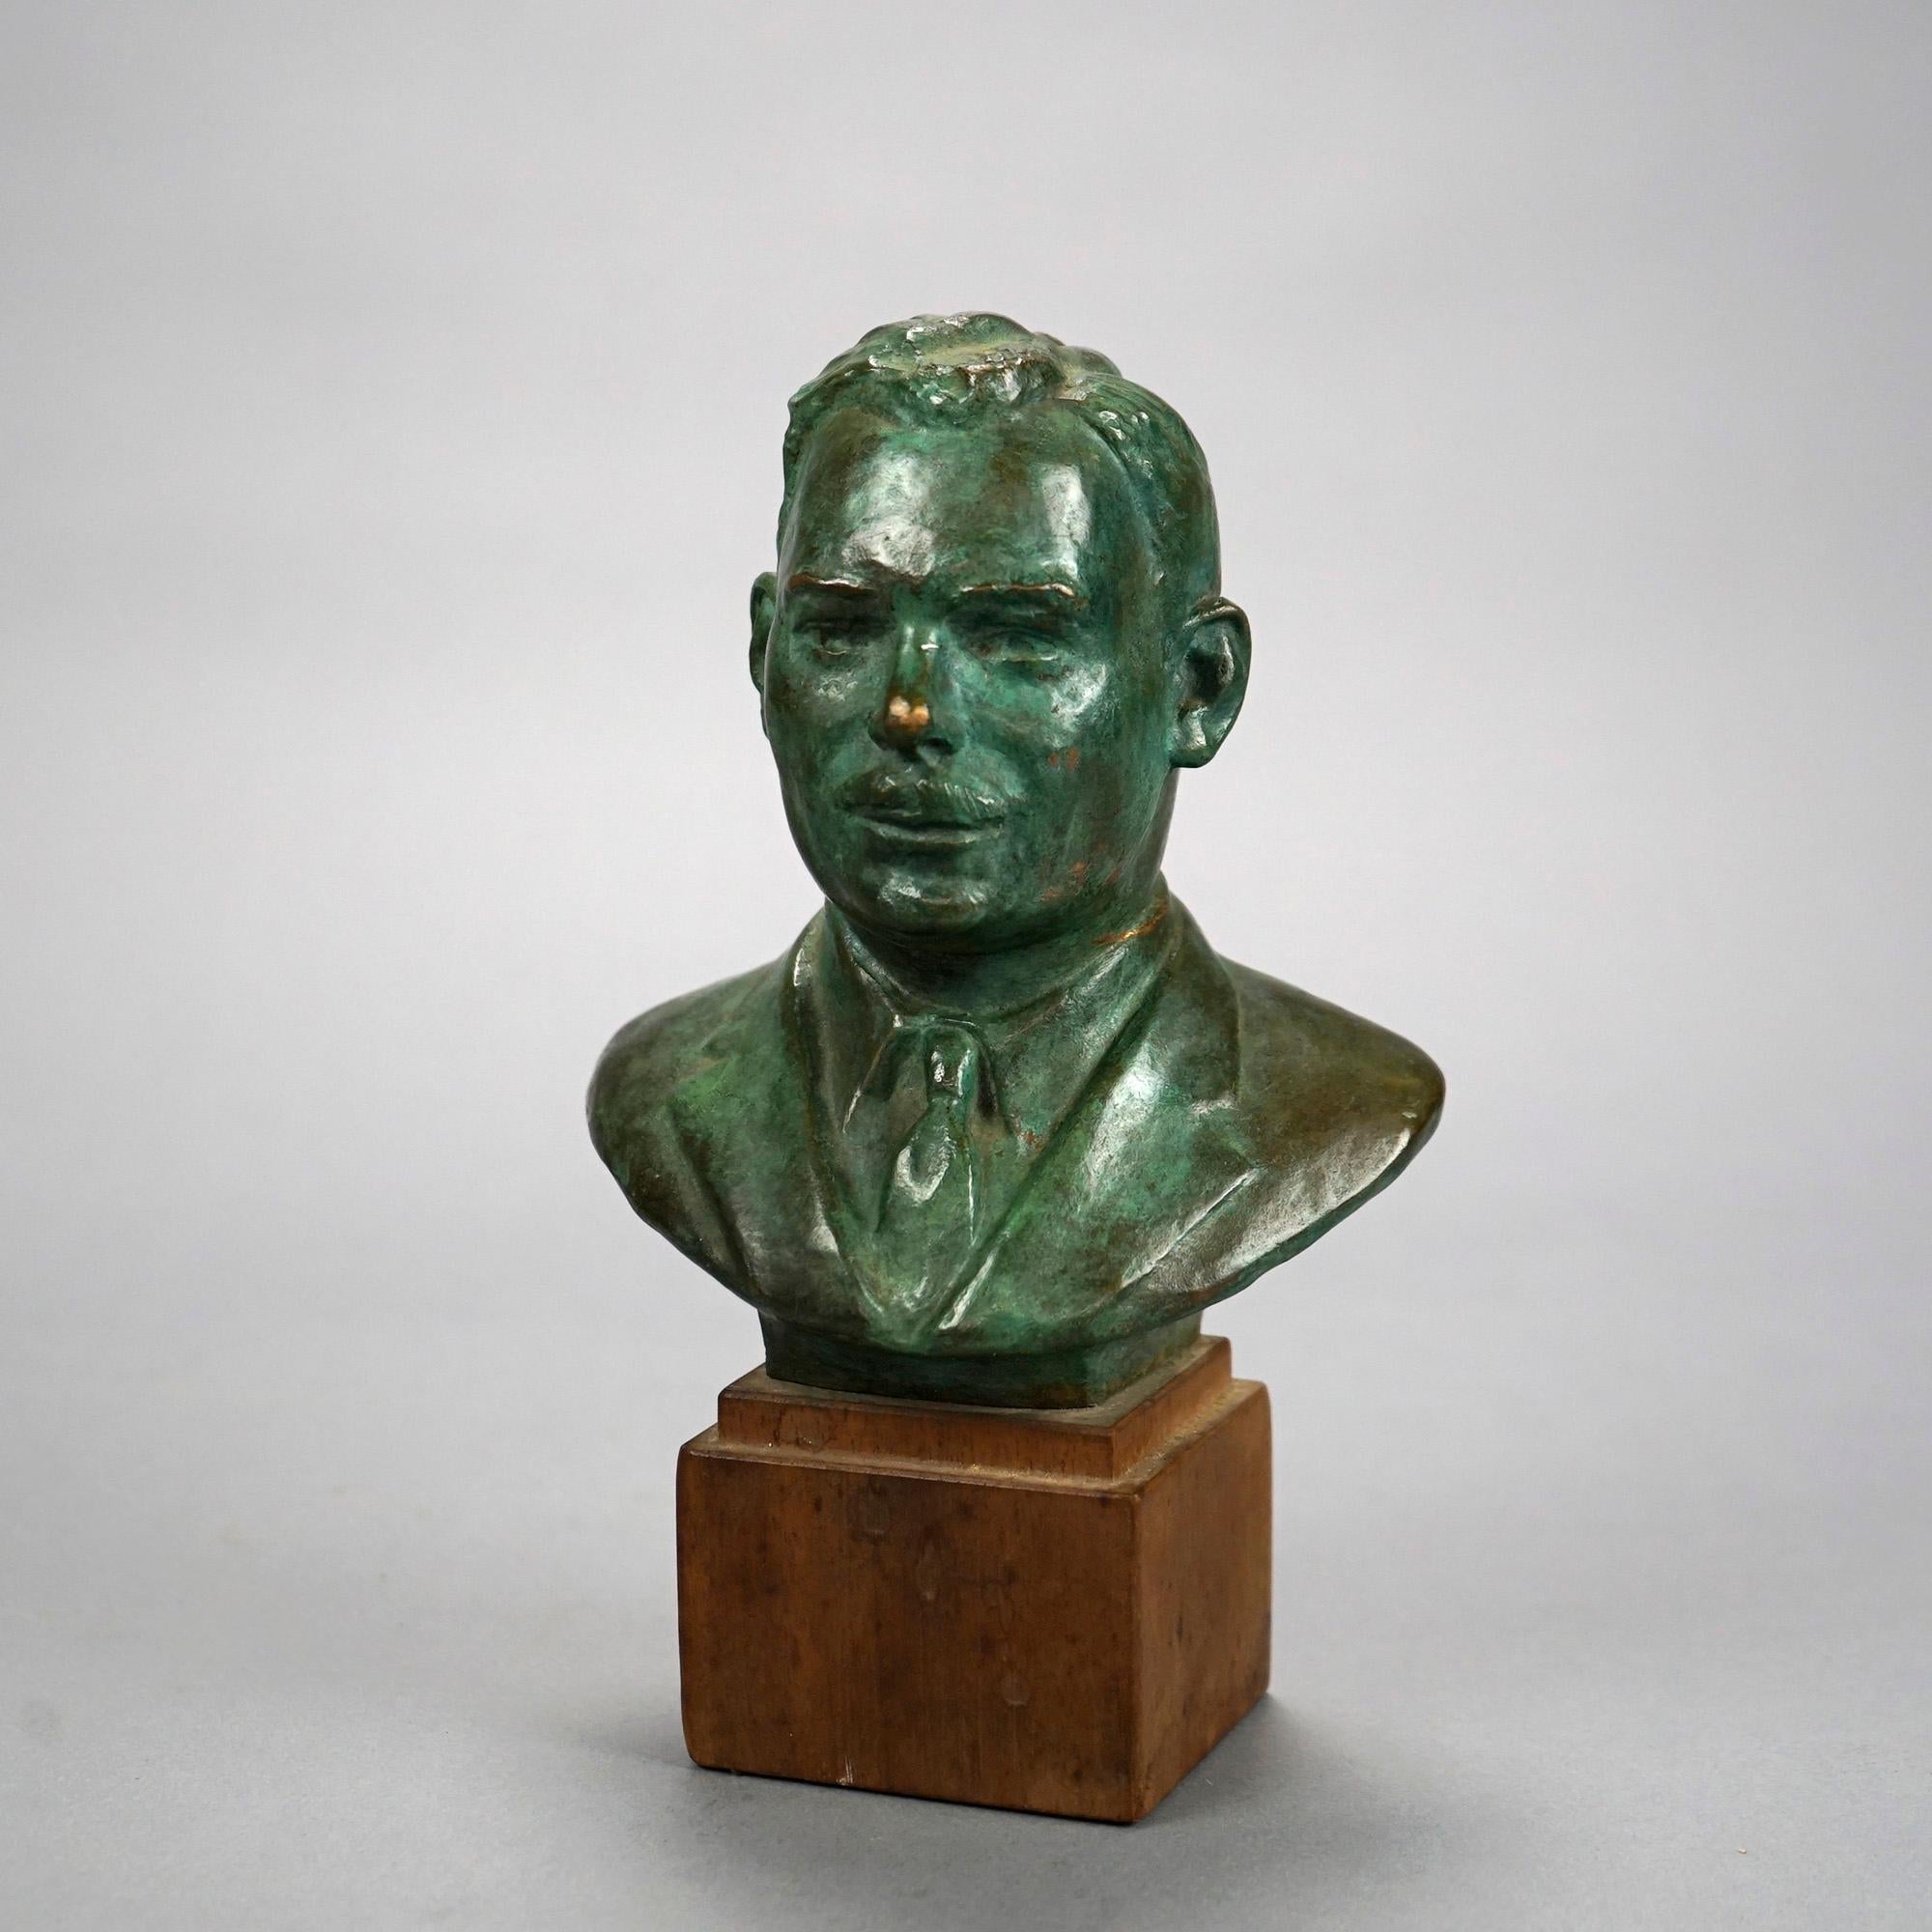 A portrait sculpture offers cast bronze bust of a man mounted on wood base and signed John Terkeni, 20th C

Measures- 8.25''H x 5''W x 3.25''D.